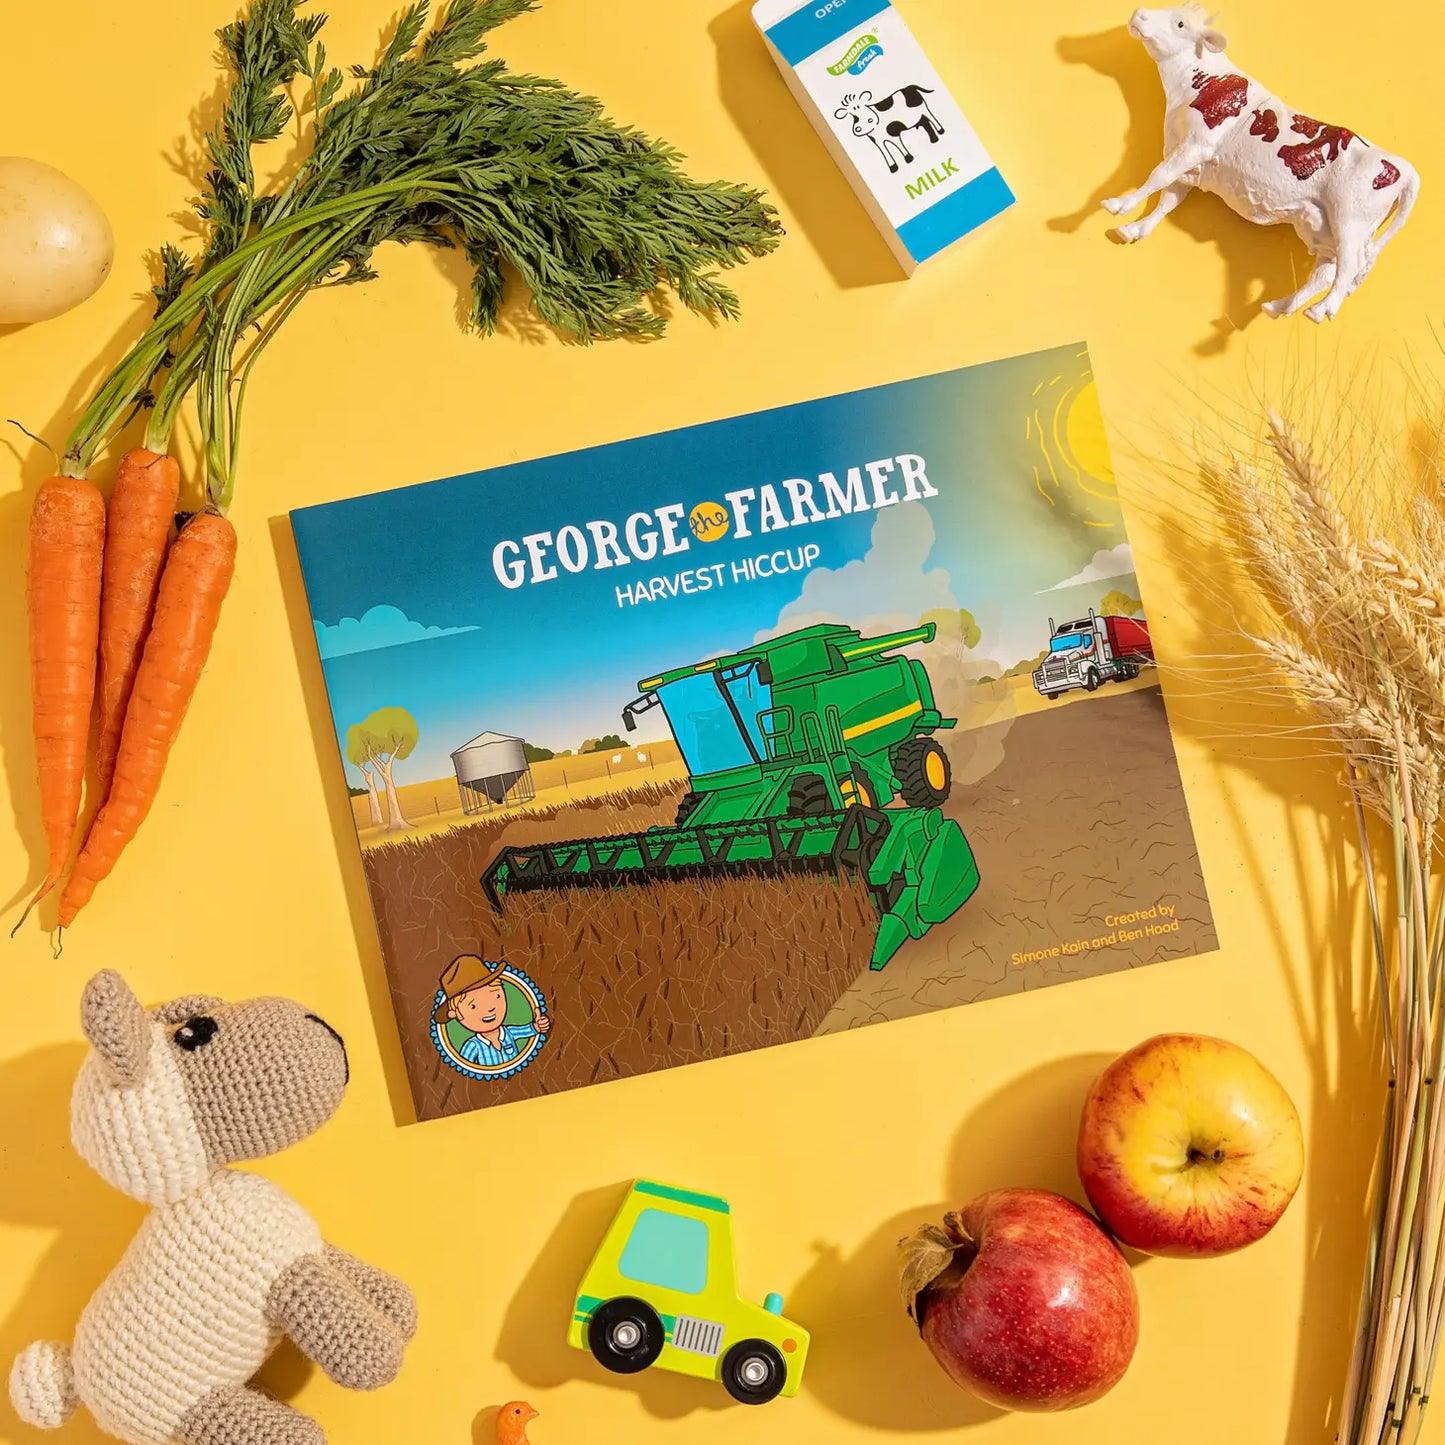 George the Farmer Harvest Hiccup Picture Book